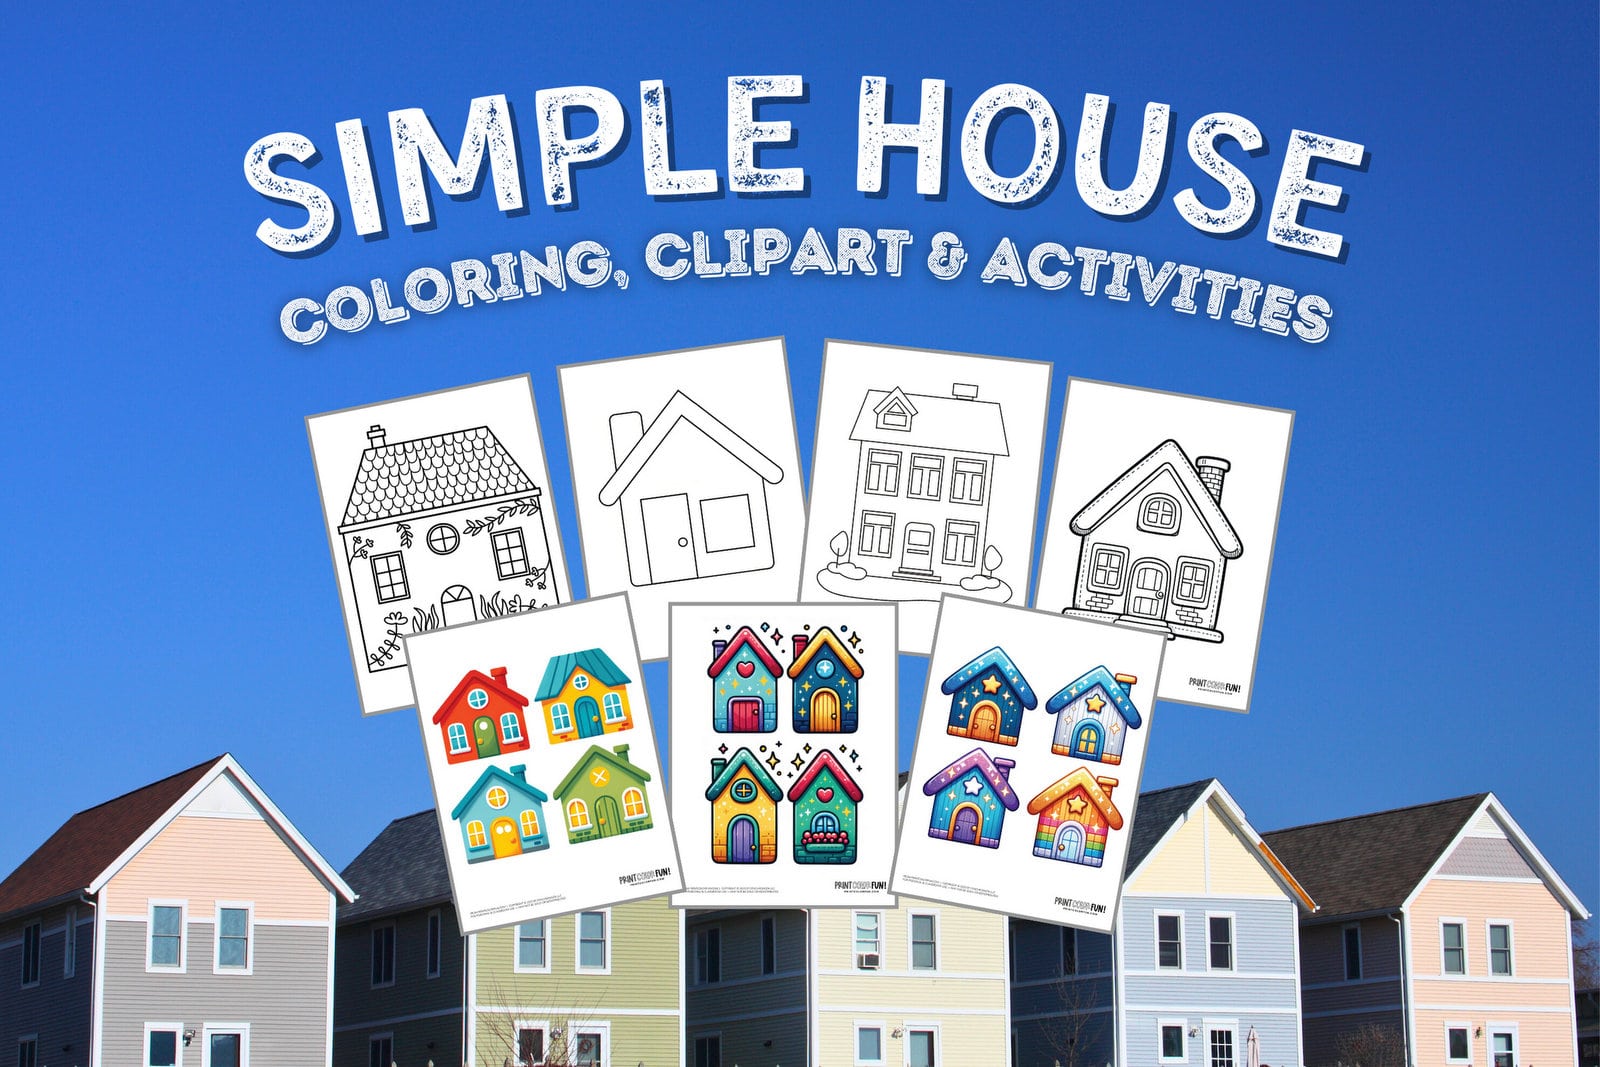 Simple house coloring page clipart activities from PrintColorFun com